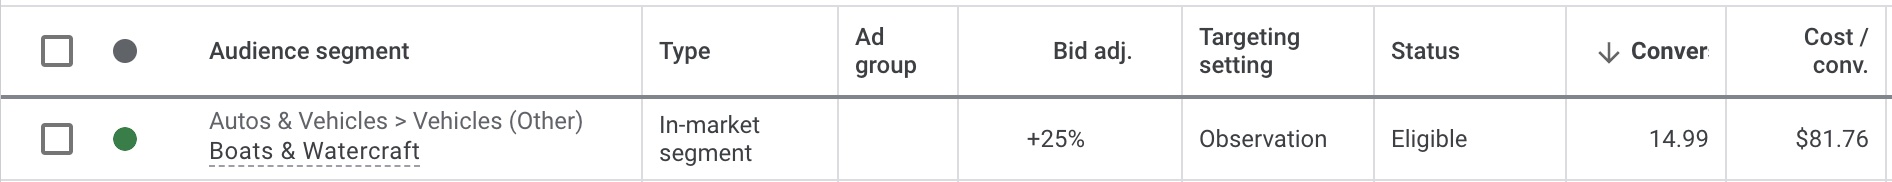 Table from Google Ads showing a boating audience with results for 90 days